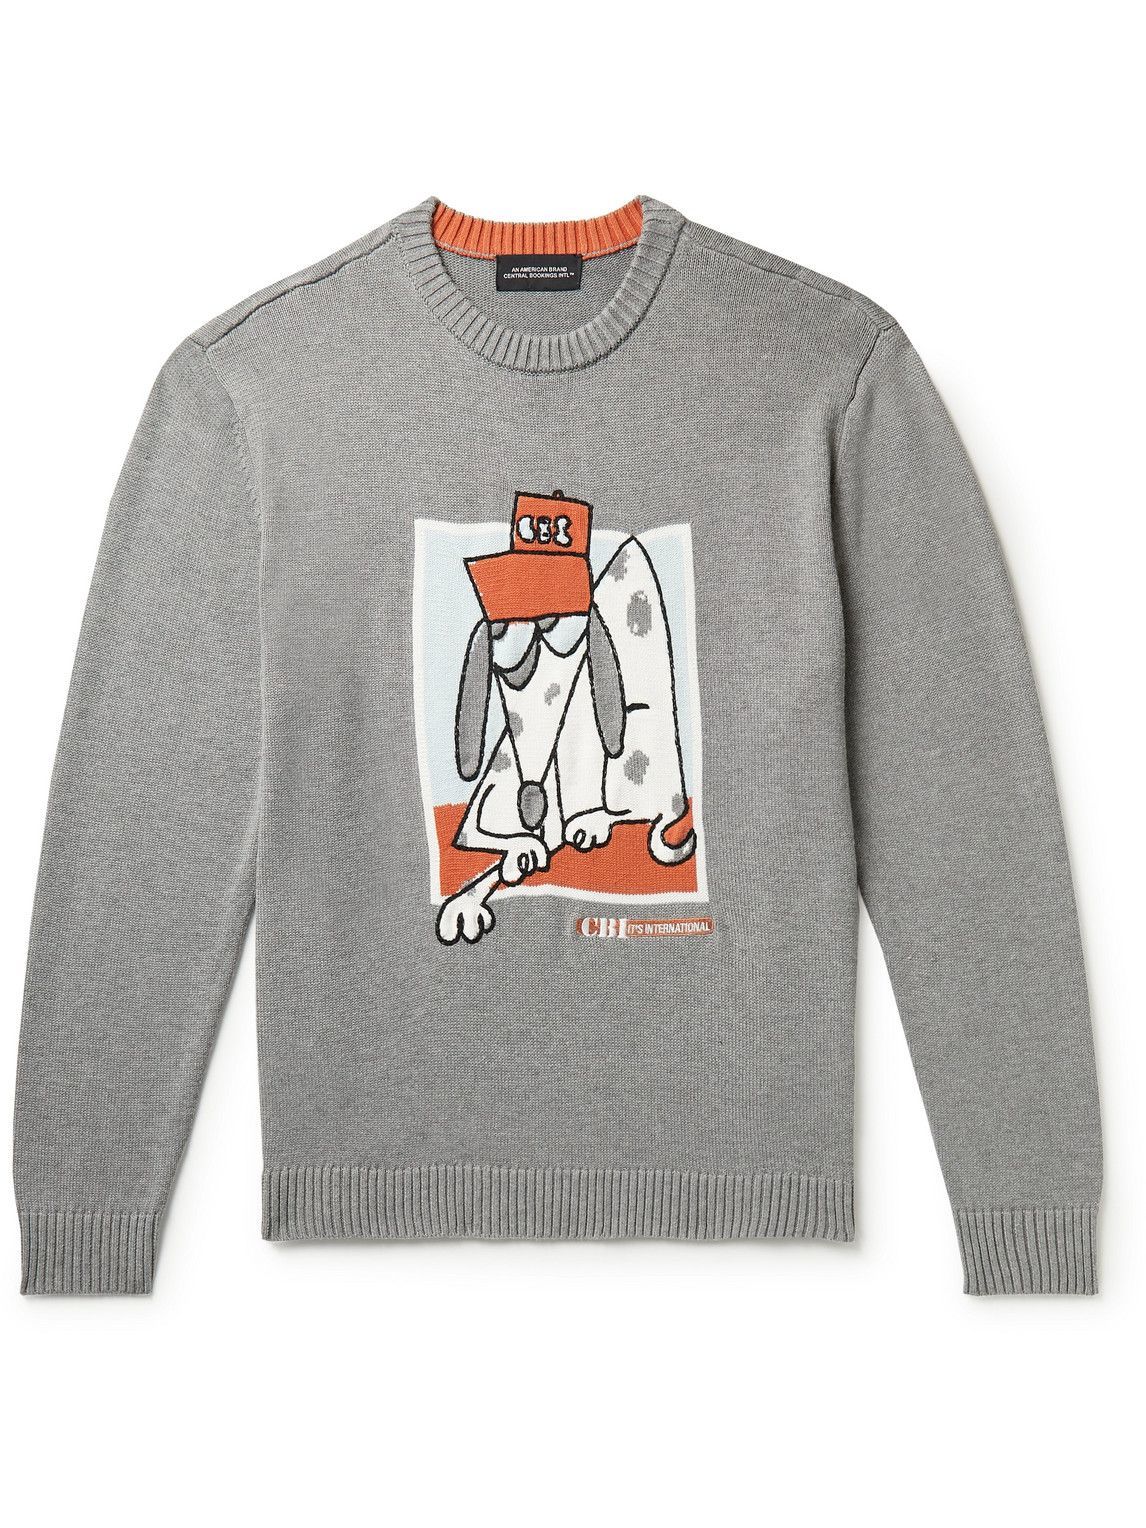 Central Bookings Intl™️ - Embroidered Intarsia Cotton Sweater - Gray